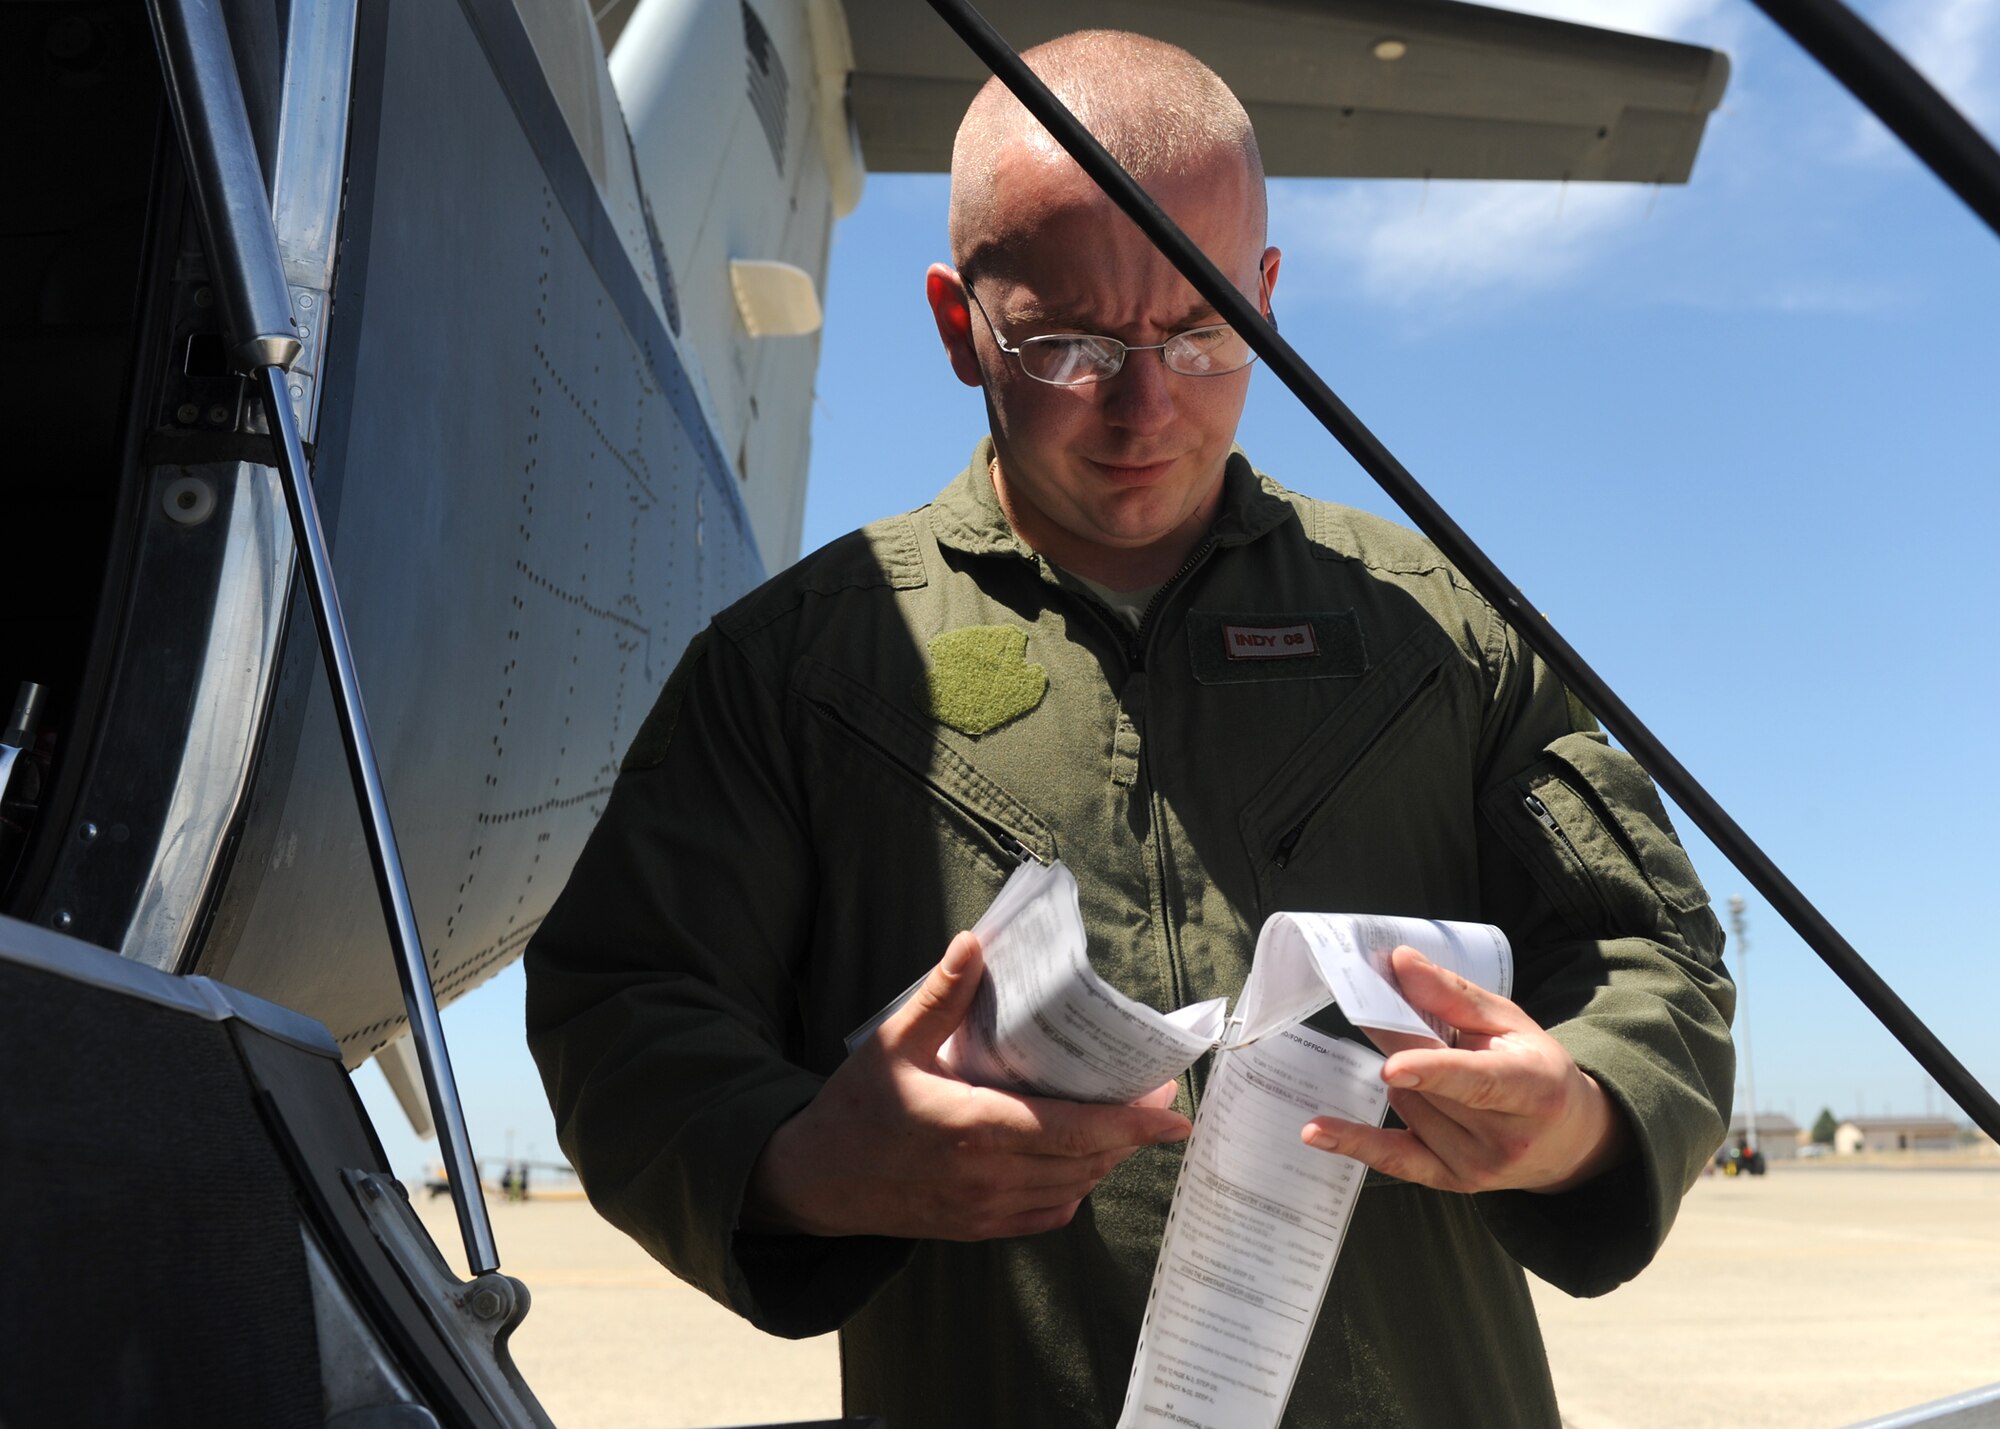 Senior Airman Tyler, 306th Intelligence Squadron, evaluates his pre-flight check list for the MC-12 Liberty aircraft at Beale Air Force Base Calif., June 12, 2013. Tyler was recently accepted into the Air Force Academy Prep School through the Leaders Encouraging Airmen Development (LEAD) program. (U.S. Air Force photo by Airman 1st Class Bobby Cummings)